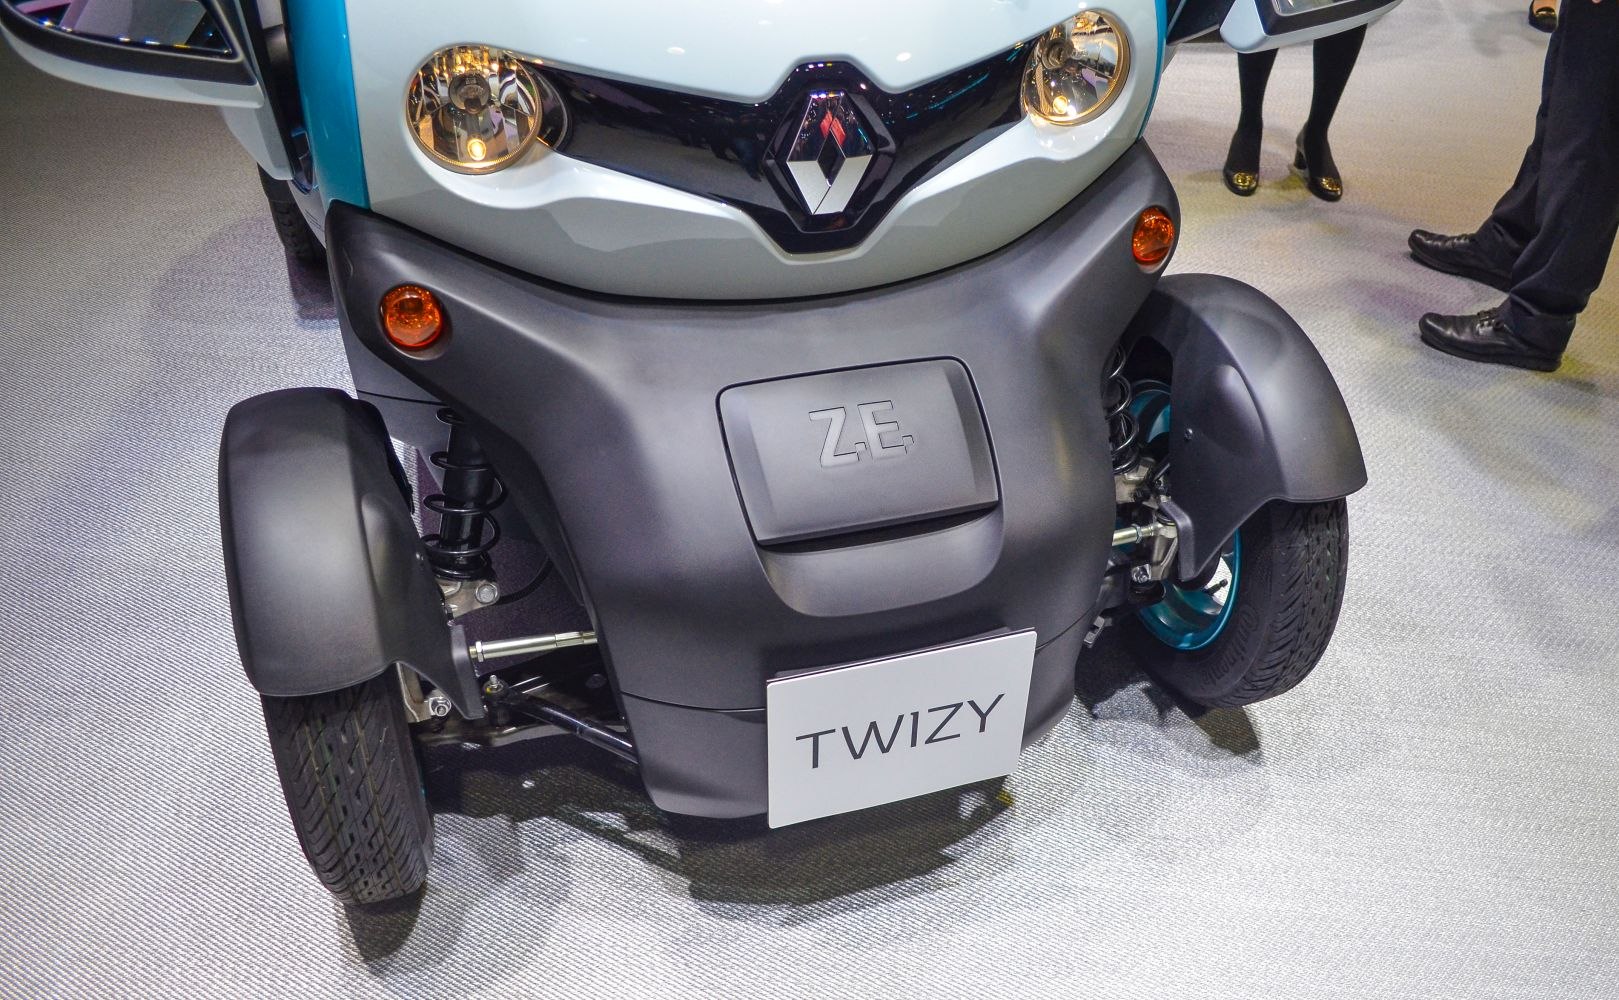 https://totalrenting.es/wp-content/uploads/2022/10/renault-twizy-ze-2012-6-1-kwh-17-cv-cuadriciclo-9.png